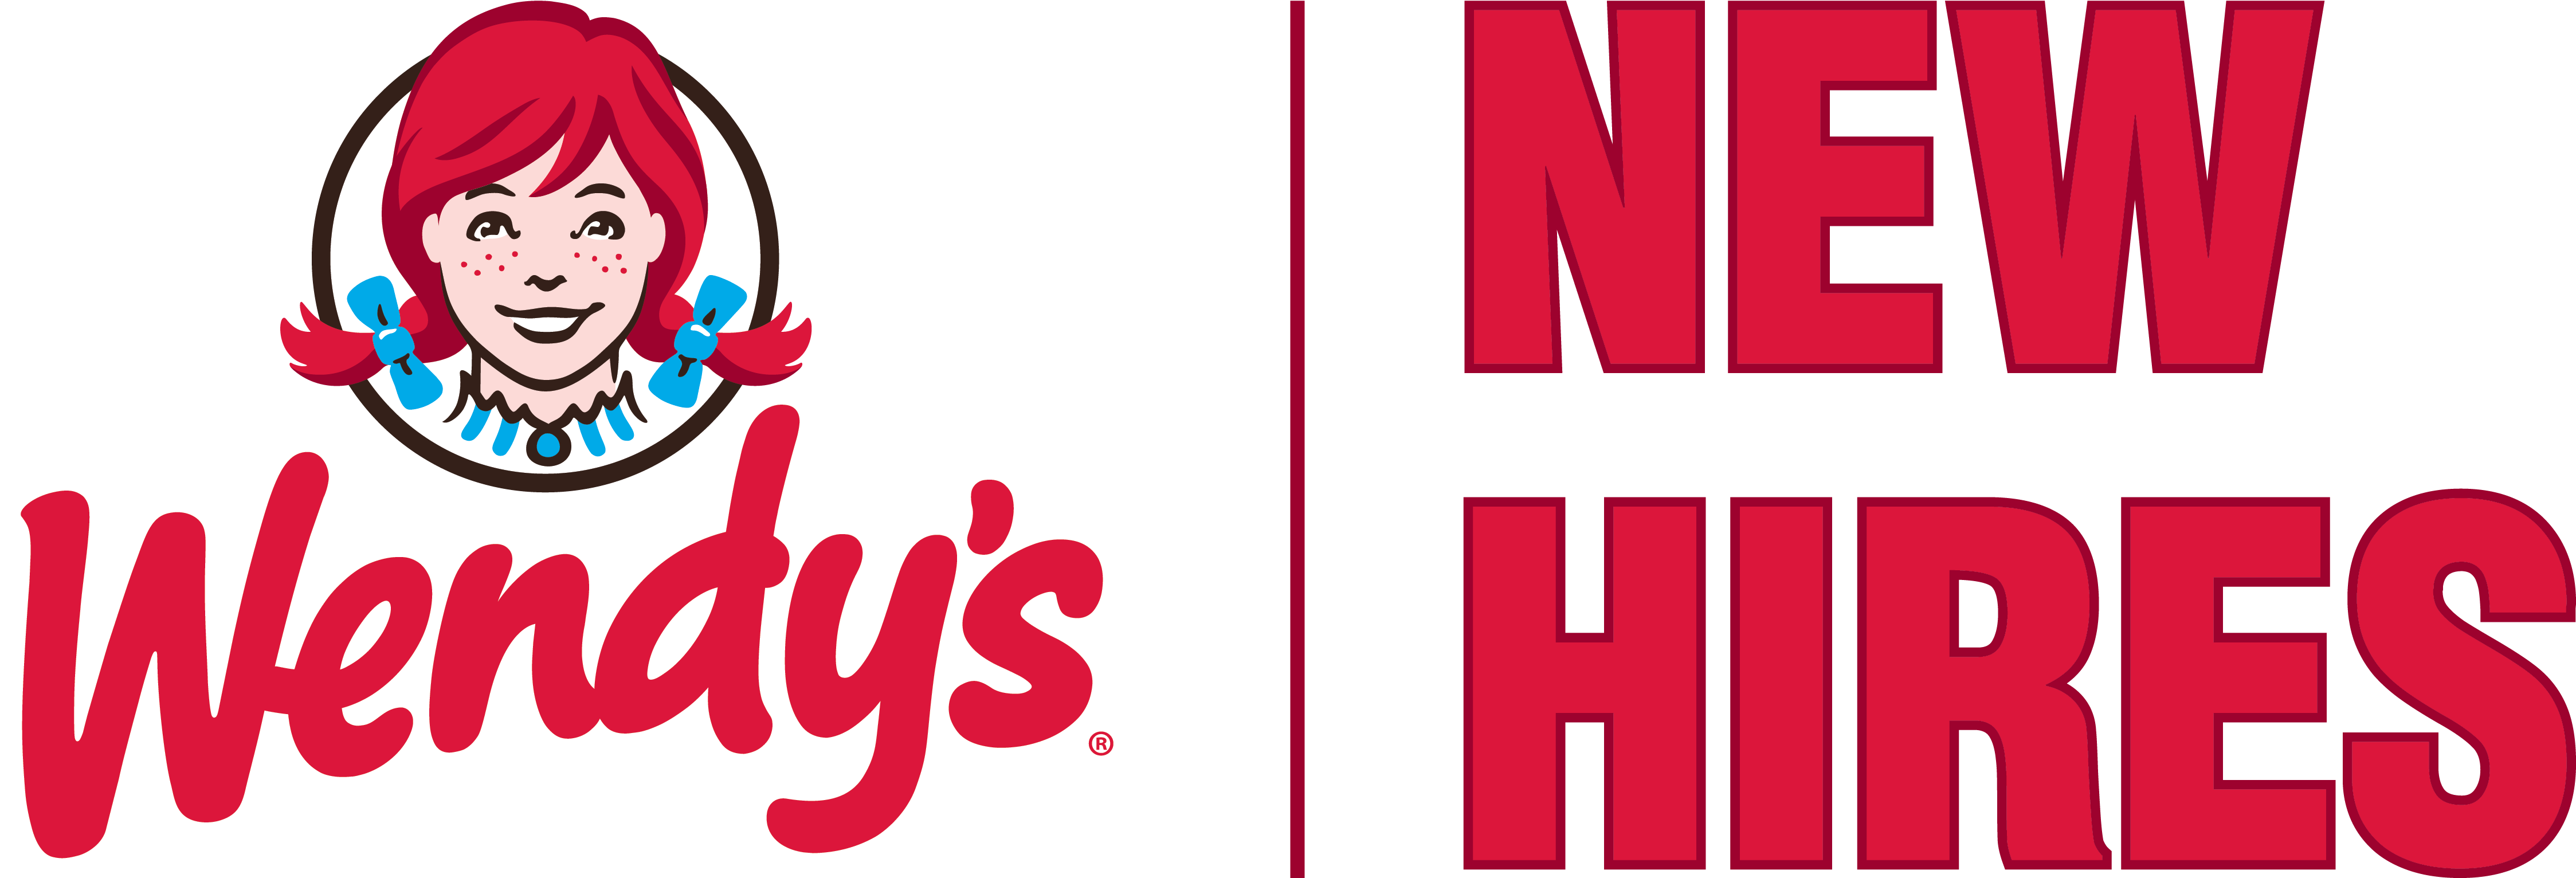 Wendy’s PNG Image